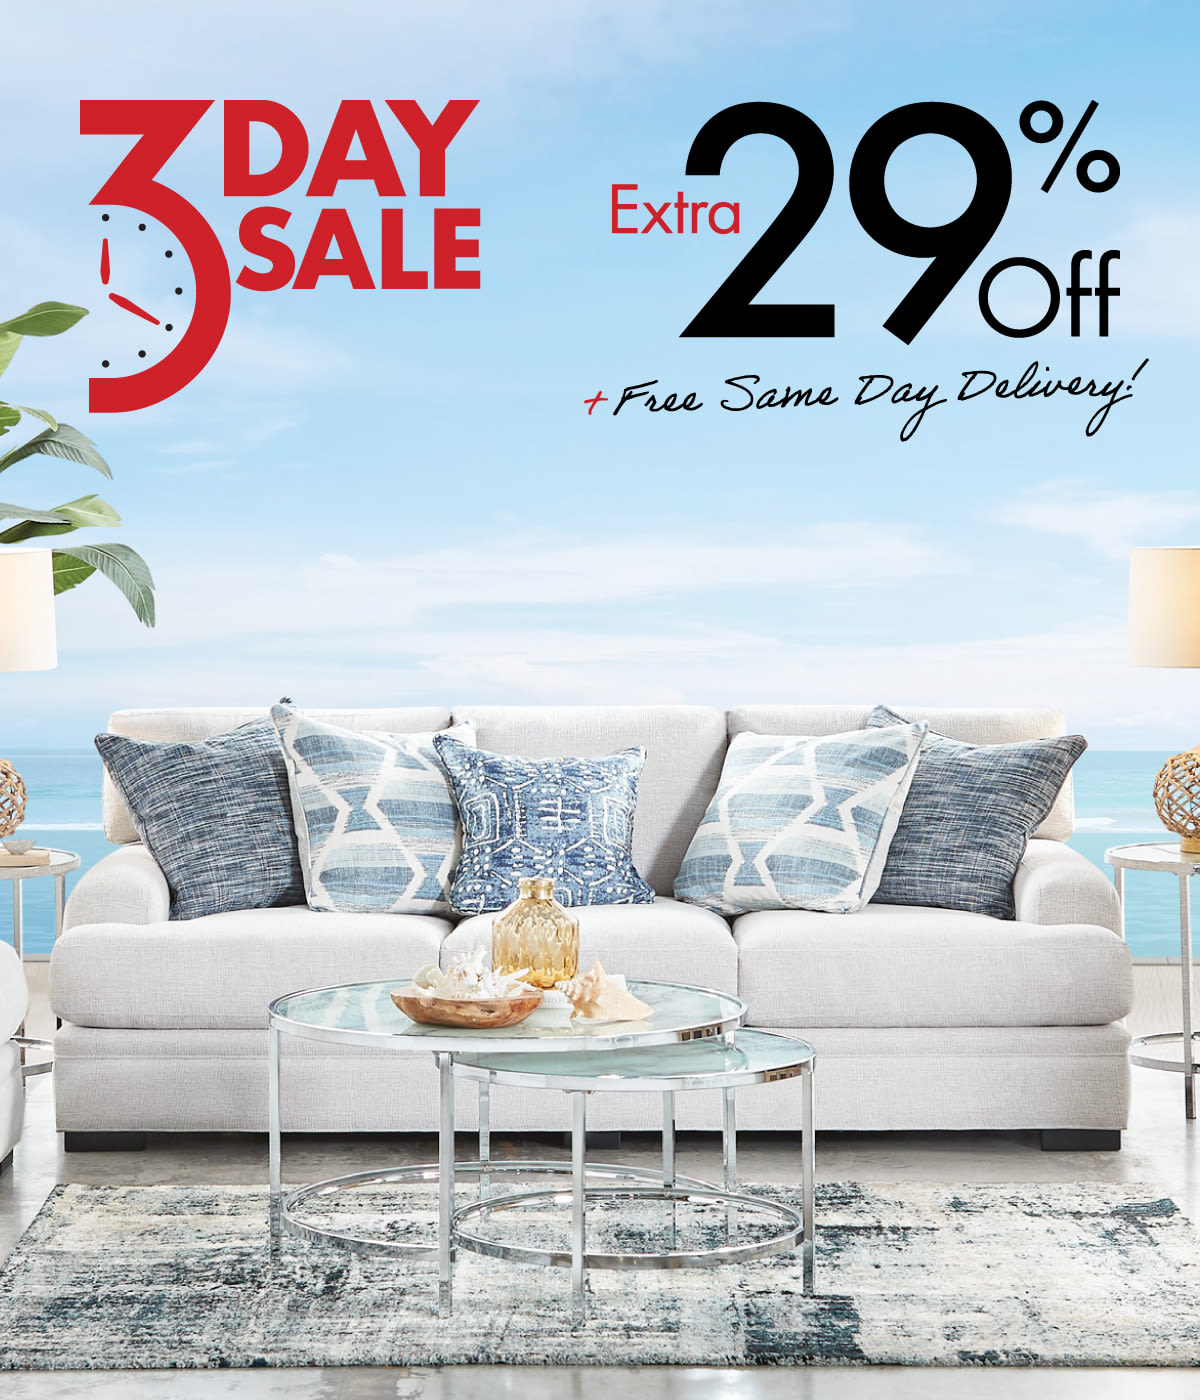 Banner image showing the 3-Day Sale at Gardner White where you can save an extra 29% off